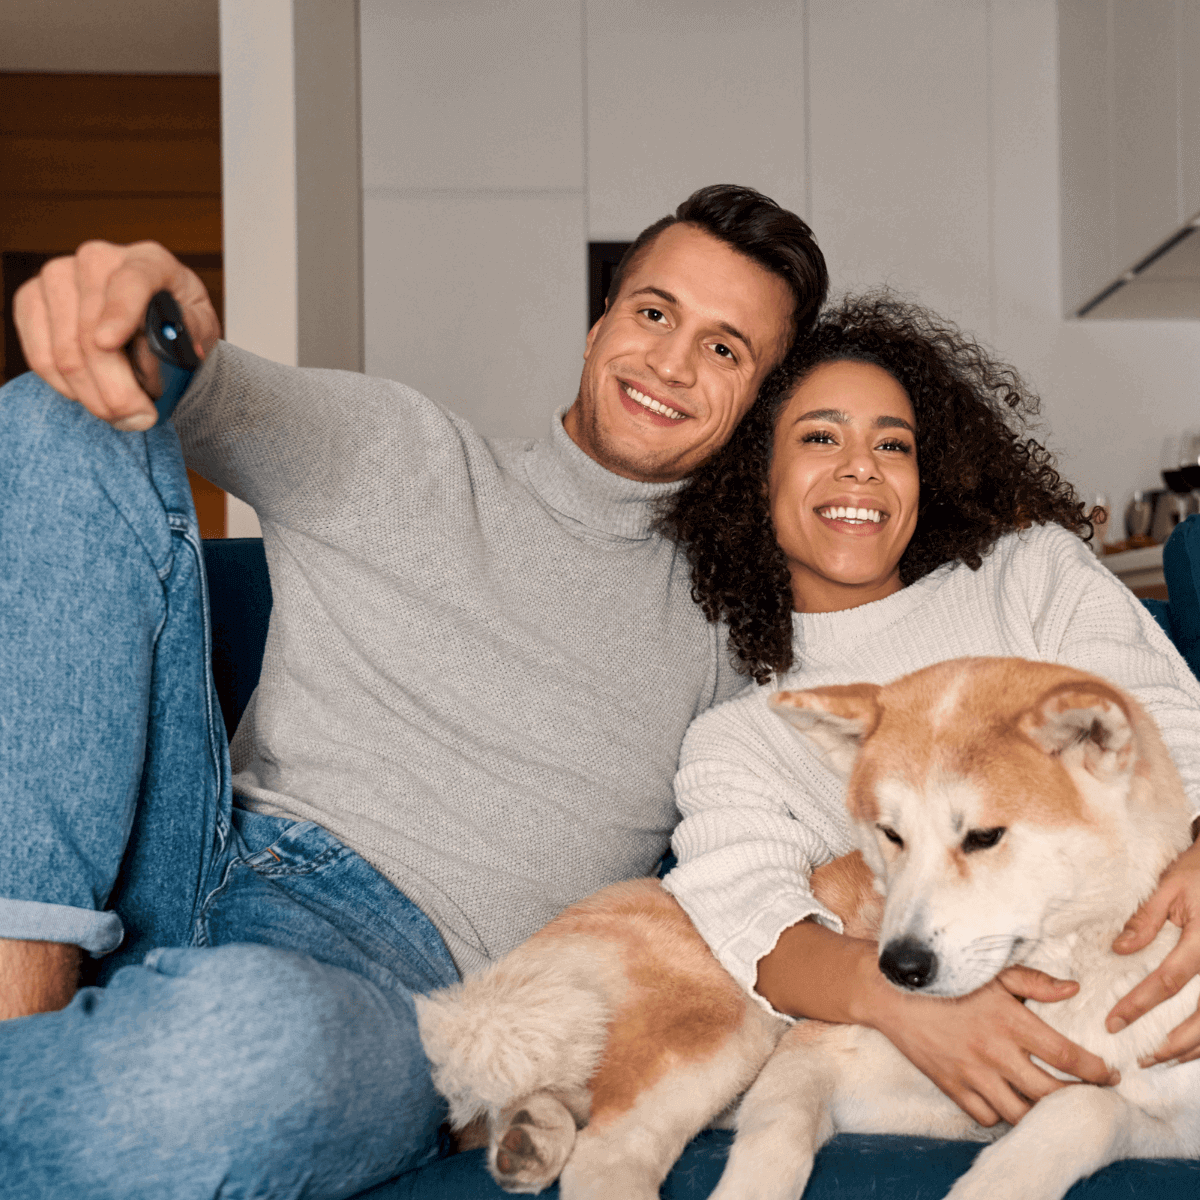 Couple with dog watching TV